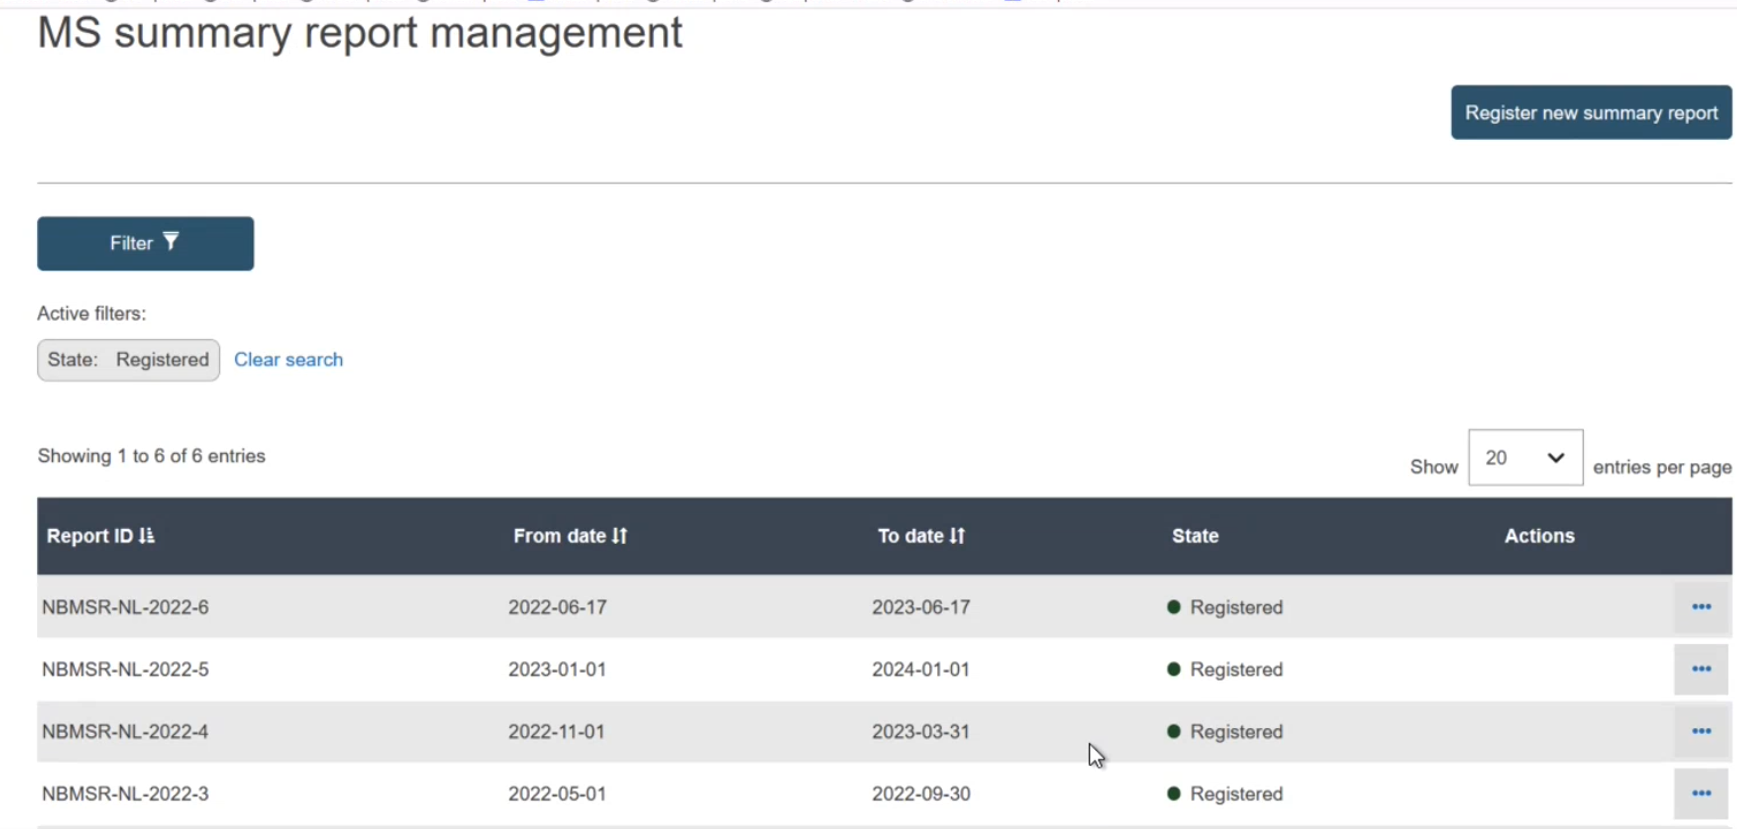 EUDAMED list of registered ms summary reports in the ms summary report management page